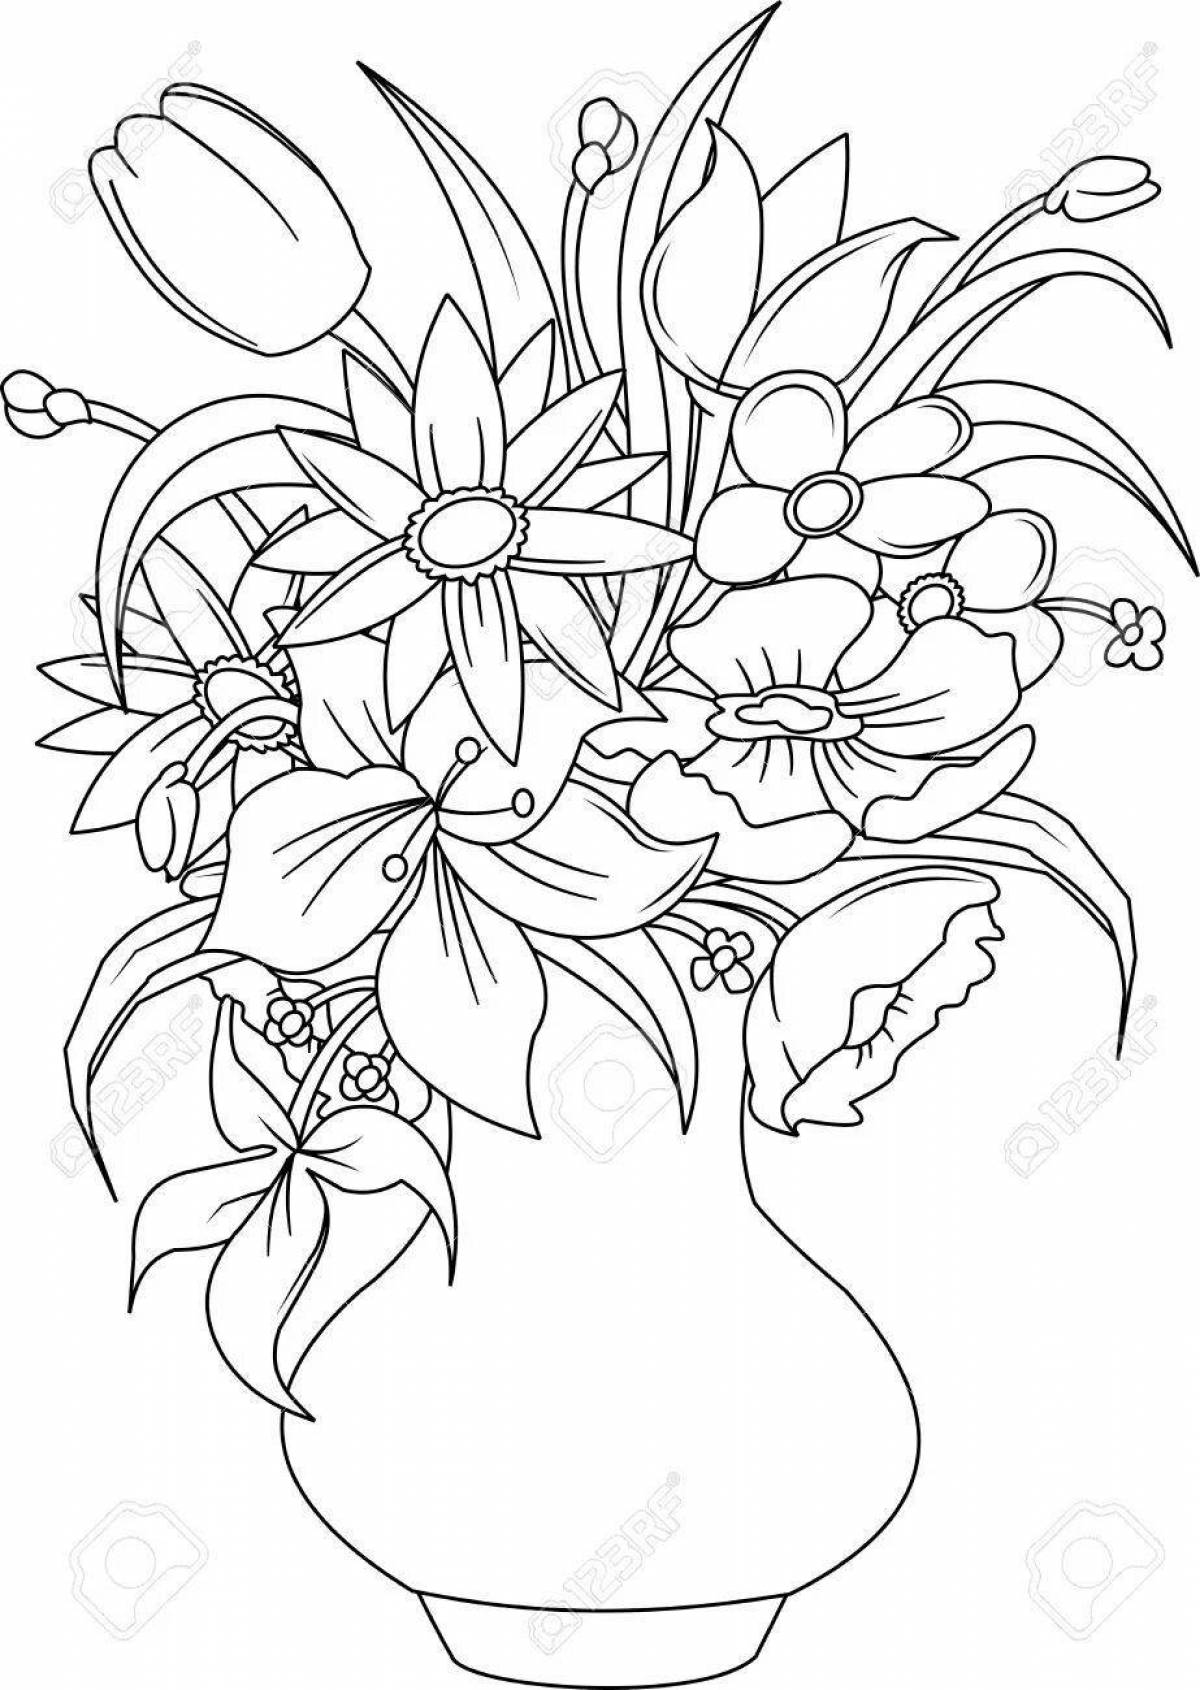 Coloring book luxury bouquet in a vase